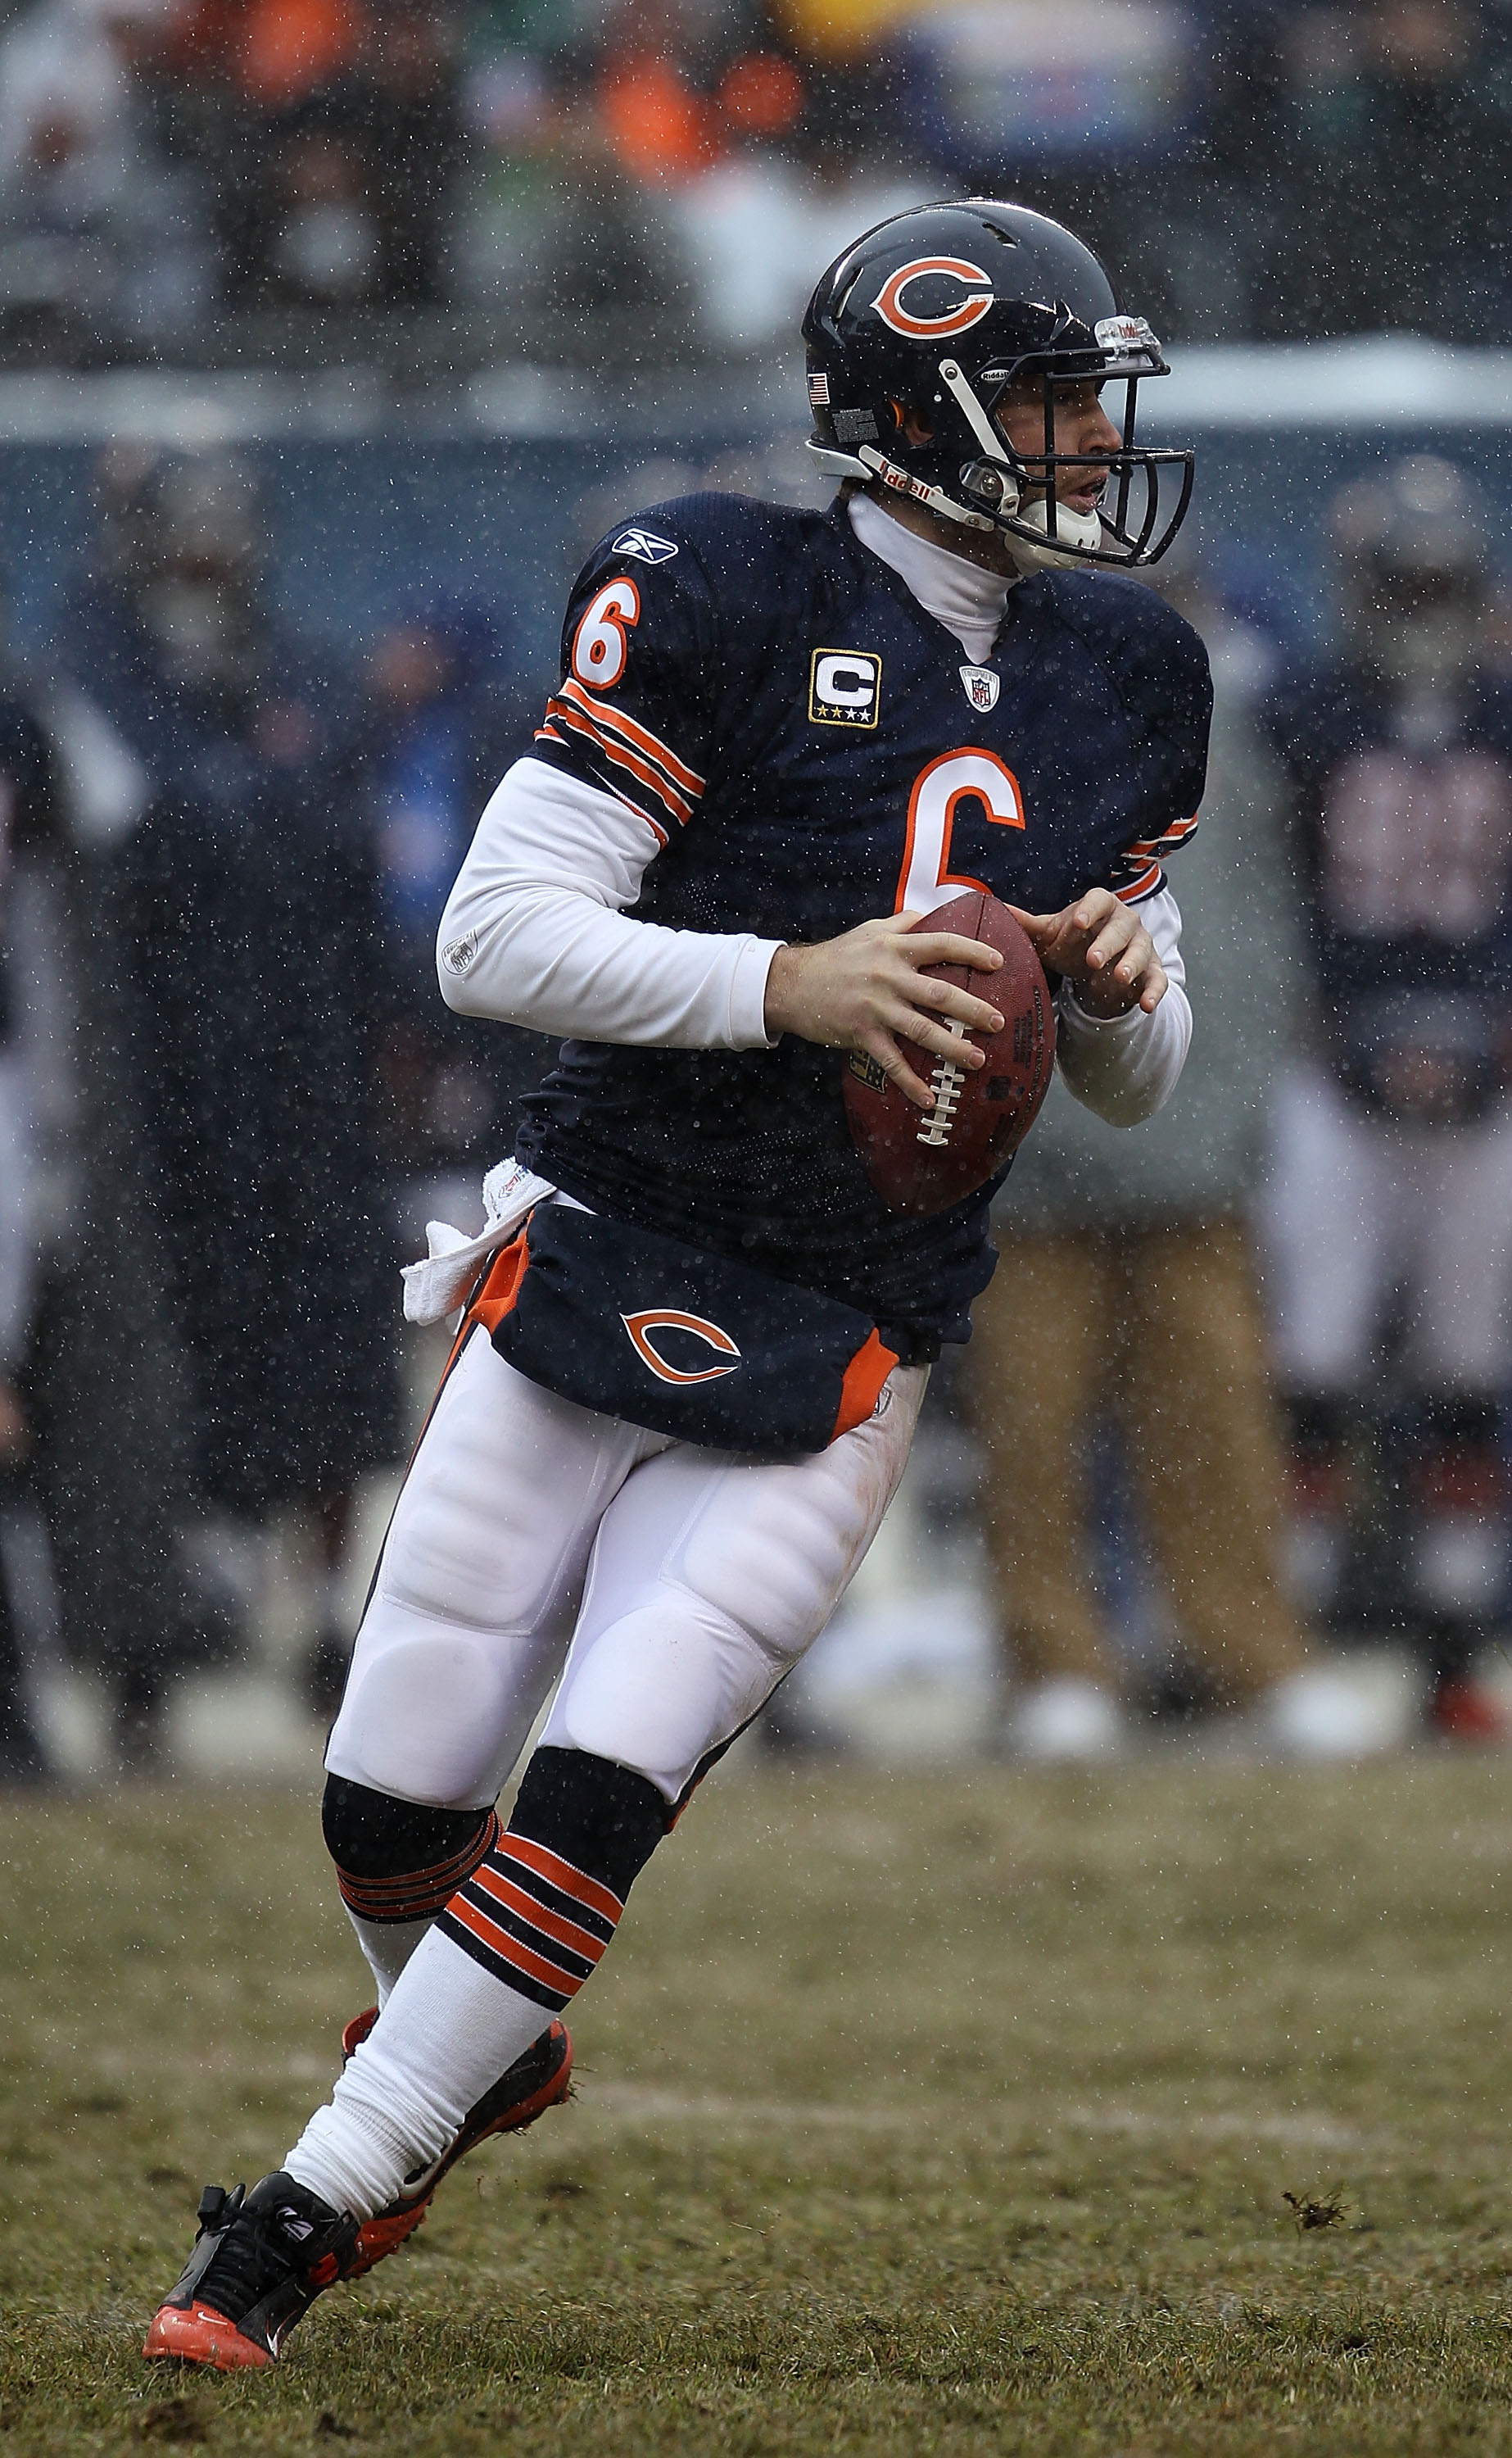 CHICAGO, IL - DECEMBER 26: Jay Cutler #6 of the Chicago Bears looks for a receiver against the New York Jets at Soldier Field on December 26, 2010 in Chicago, Illinois. The Bears defeated the Jets 38-34. (Photo by Jonathan Daniel/Getty Images)